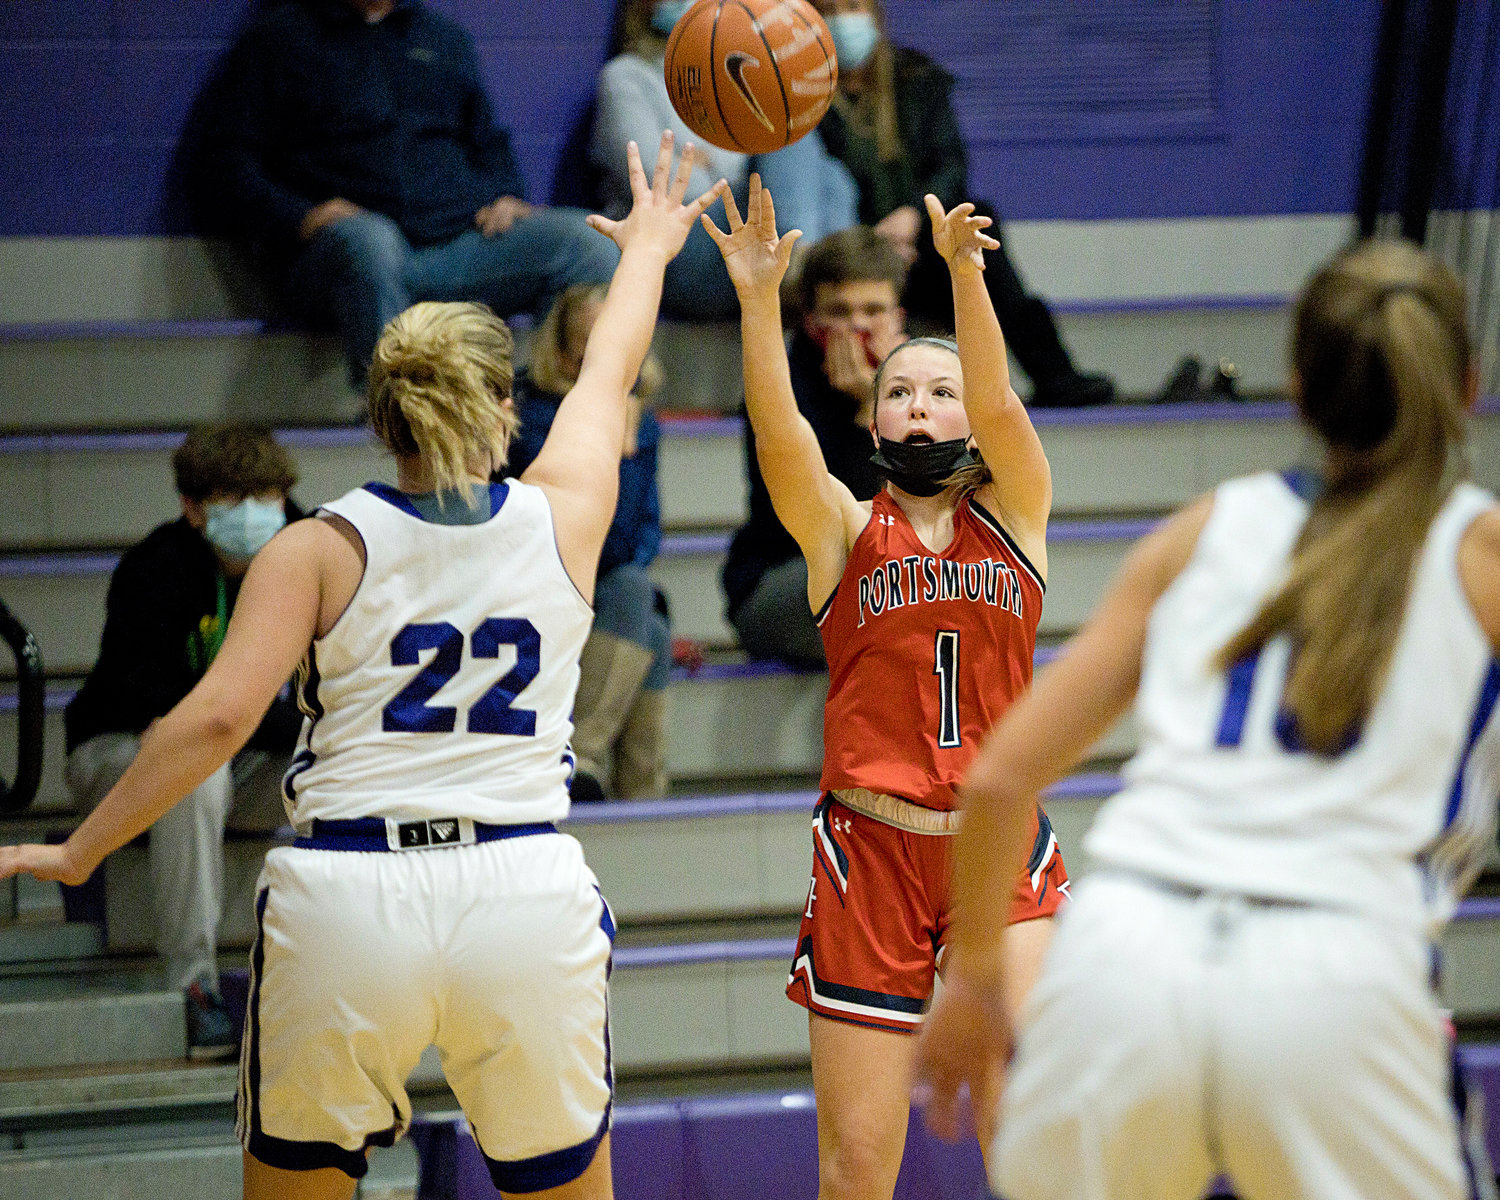 The Patriots’ Keira Rogers makes a shot over Mt. Hope opponents.